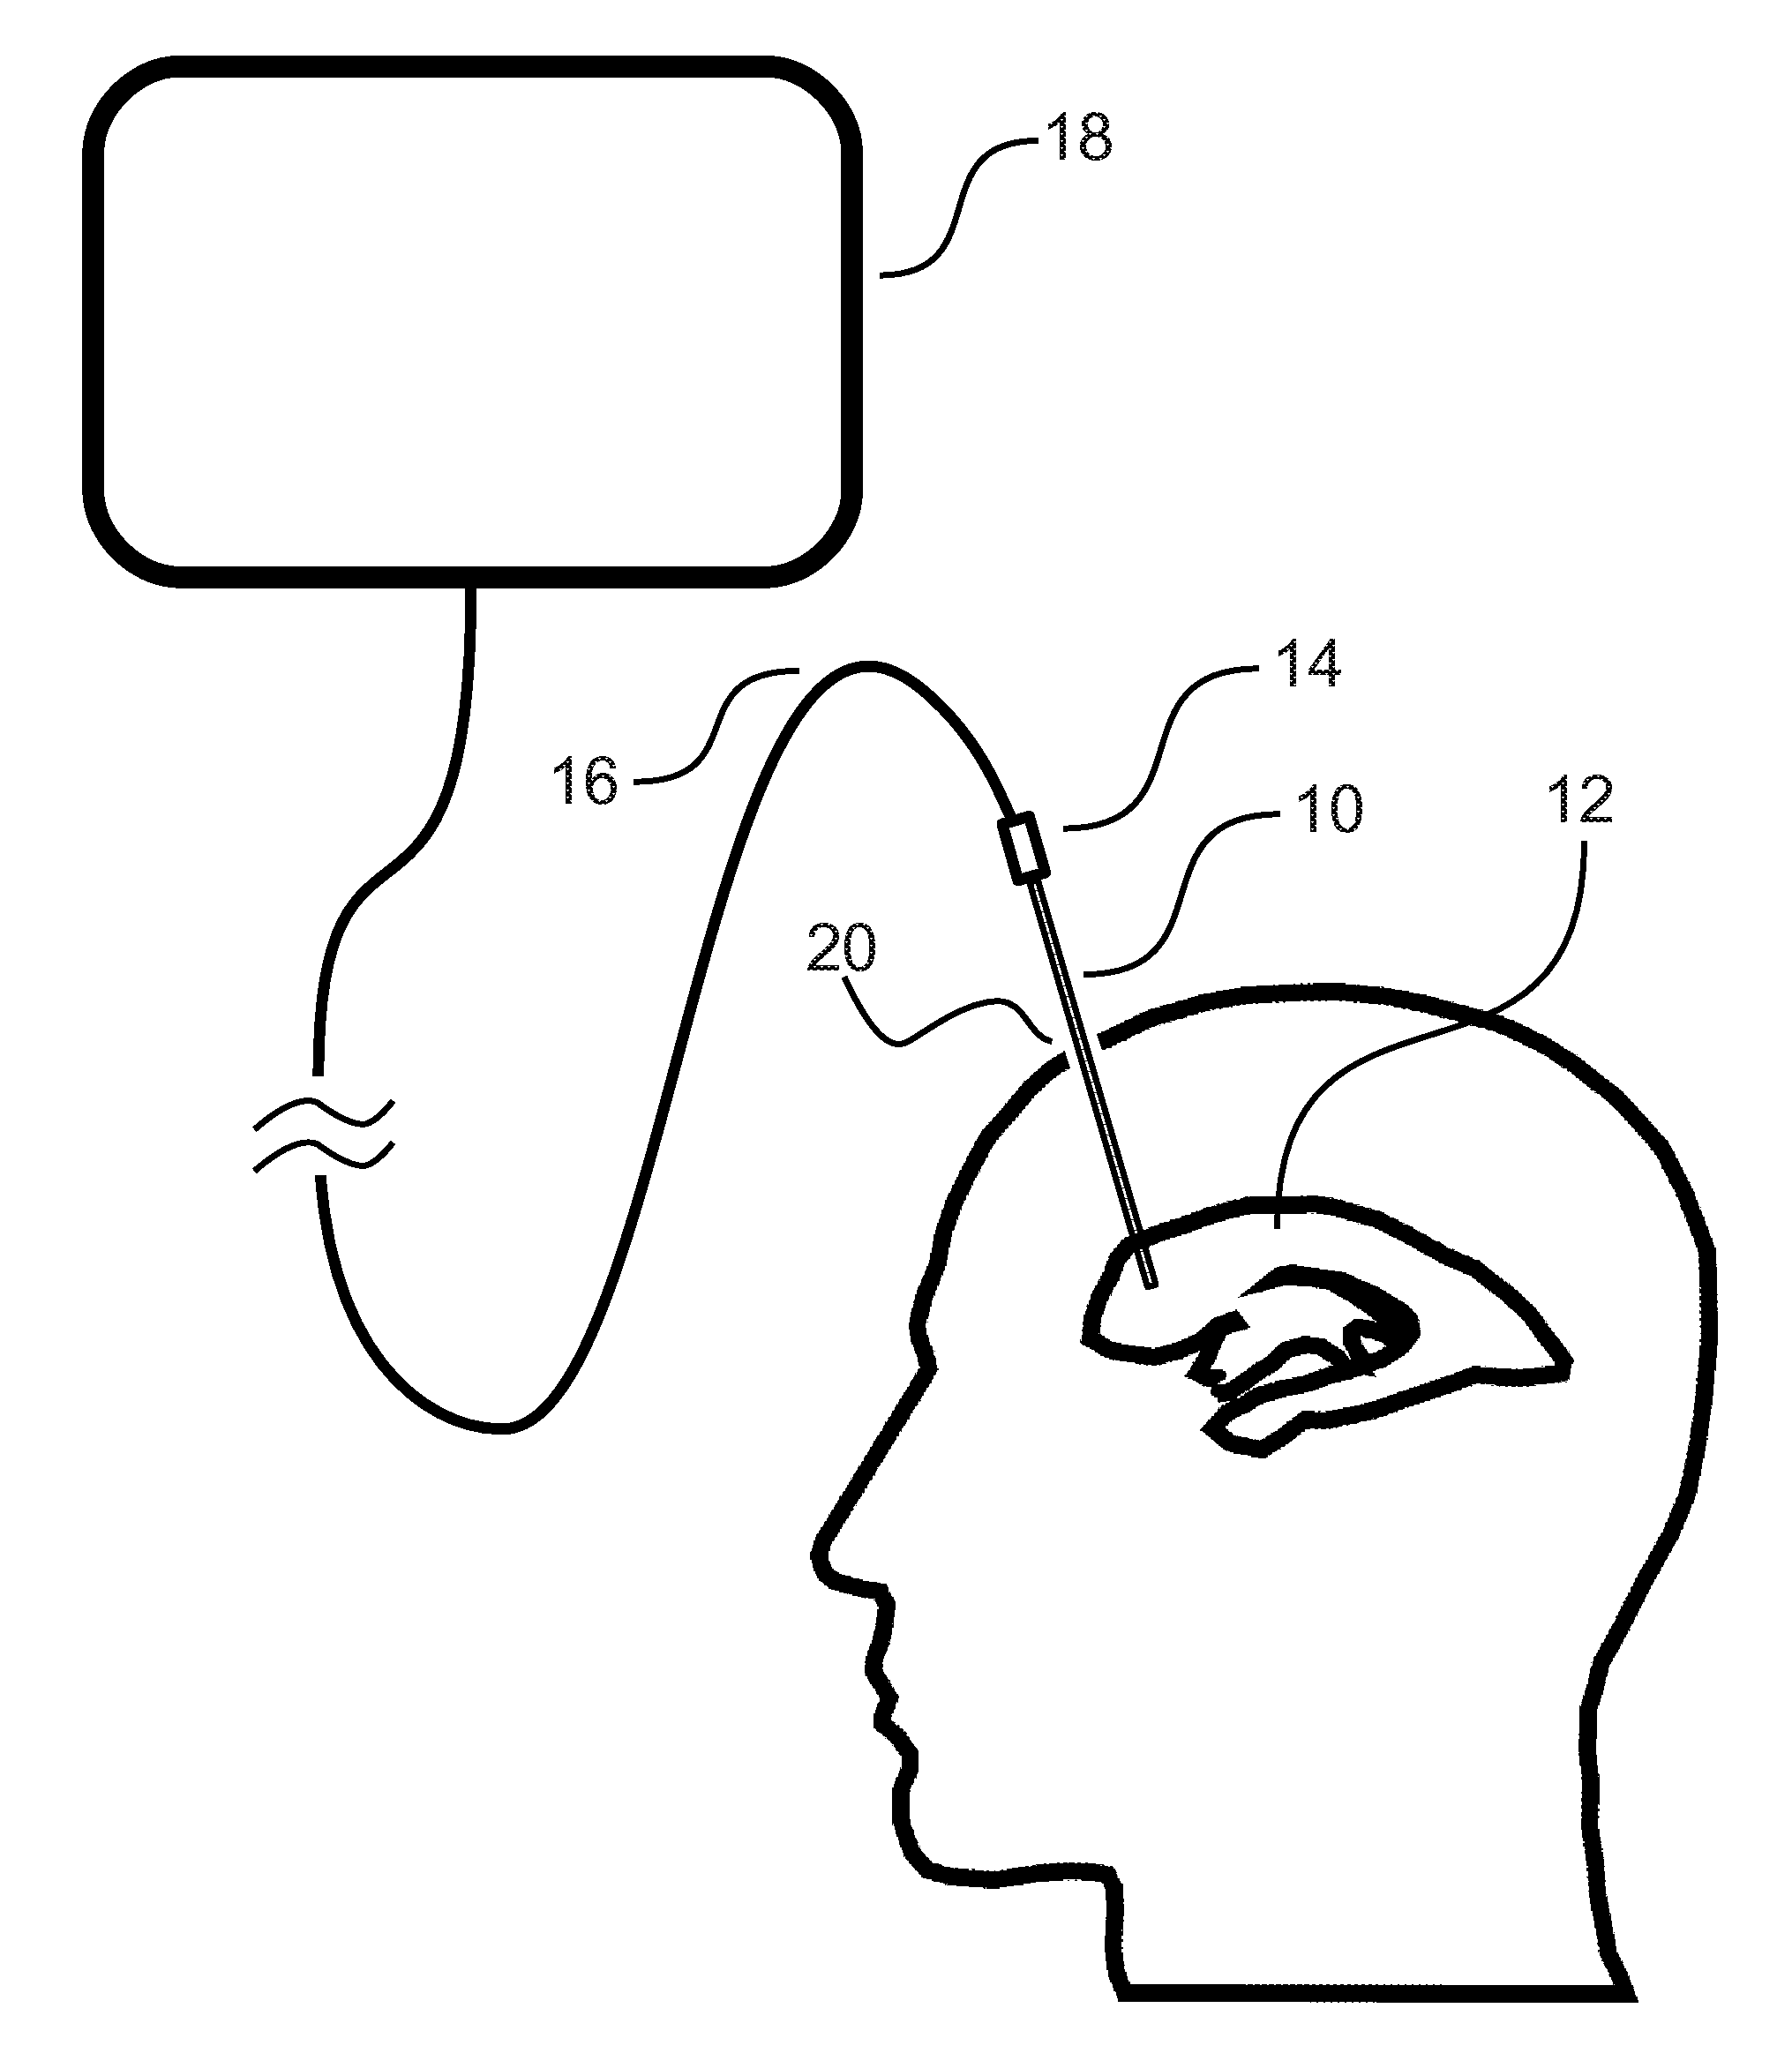 System and method for inserting intracranial catheters